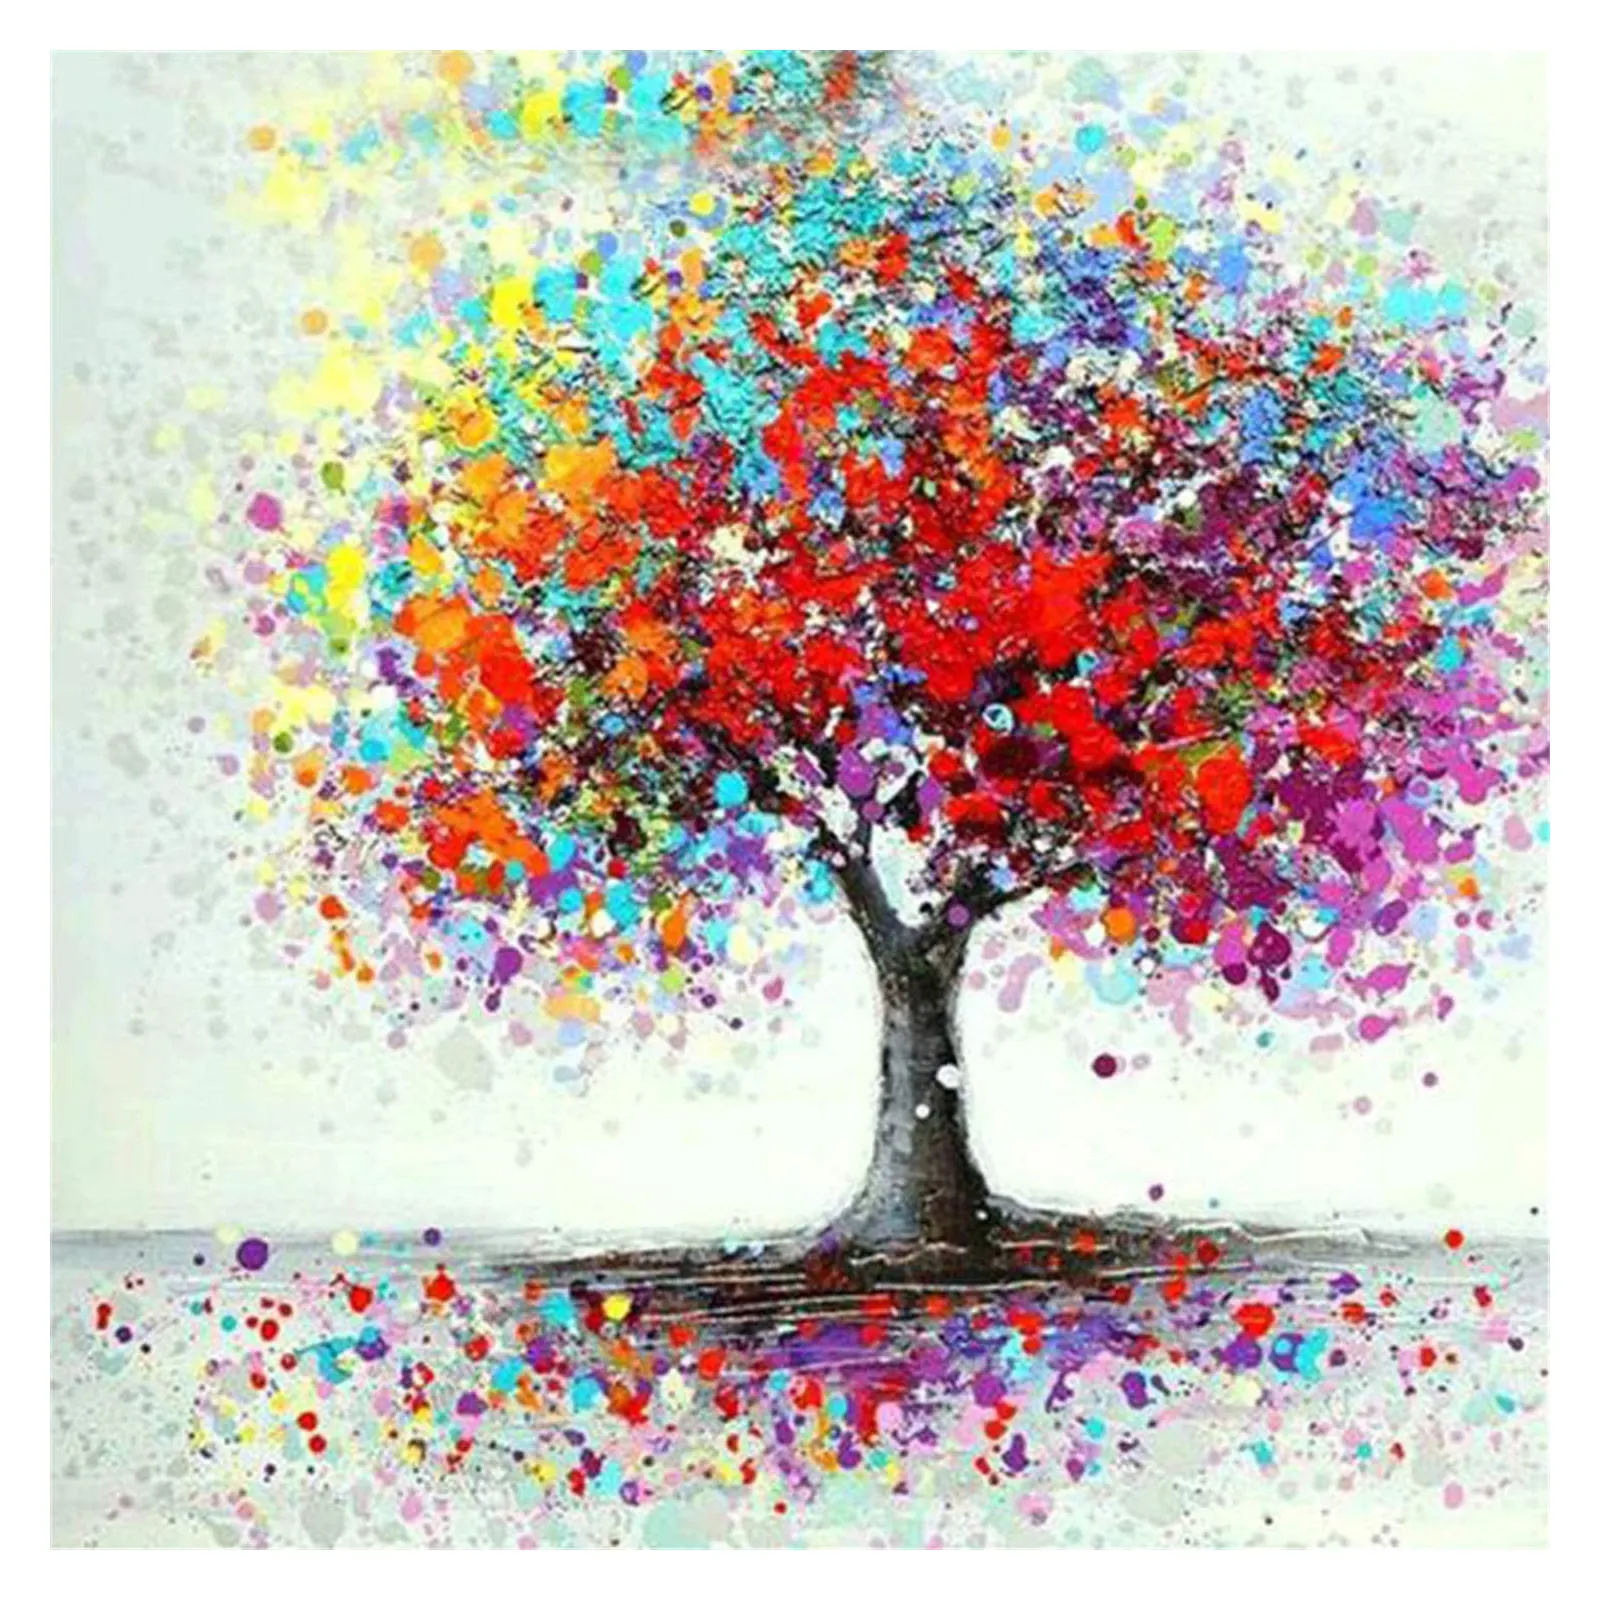 Wholesale High Quality Full Drills Landscape 30x40 Diy Diamond Art Painting For Beginners Mosaic Diamond Embroidery kits